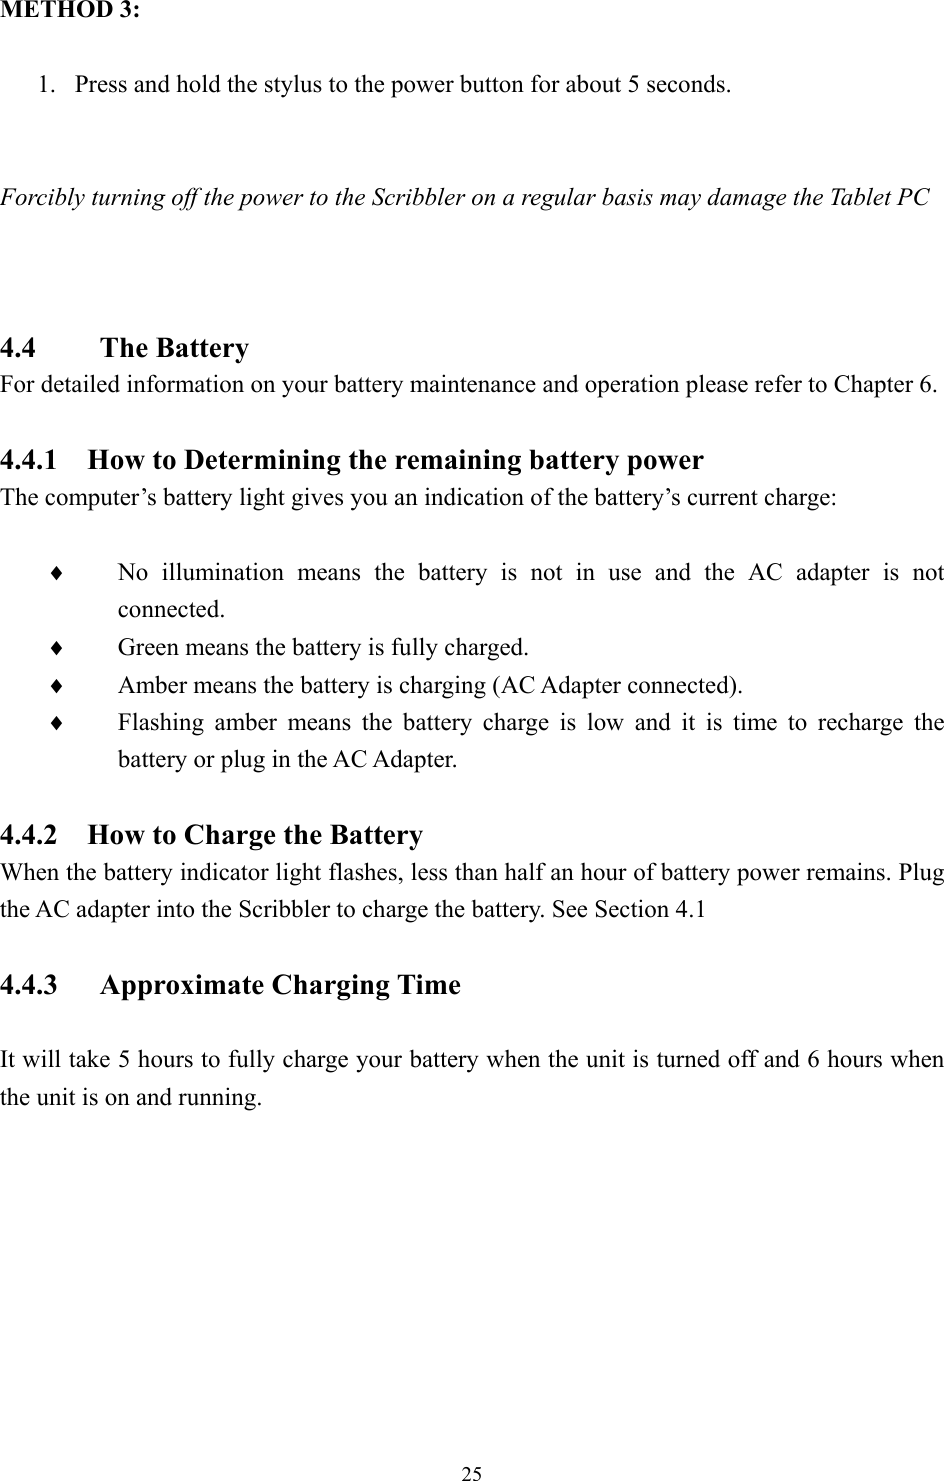 METHOD 3:  1.  Press and hold the stylus to the power button for about 5 seconds.   Forcibly turning off the power to the Scribbler on a regular basis may damage the Tablet PC        4.4    The Battery For detailed information on your battery maintenance and operation please refer to Chapter 6.  4.4.1    How to Determining the remaining battery power The computer’s battery light gives you an indication of the battery’s current charge:  No illumination means the battery is not in use and the AC adapter is not connected. ♦ ♦ ♦ ♦ Green means the battery is fully charged. Amber means the battery is charging (AC Adapter connected). Flashing amber means the battery charge is low and it is time to recharge the battery or plug in the AC Adapter.  4.4.2    How to Charge the Battery When the battery indicator light flashes, less than half an hour of battery power remains. Plug the AC adapter into the Scribbler to charge the battery. See Section 4.1  4.4.3 Approximate Charging Time  It will take 5 hours to fully charge your battery when the unit is turned off and 6 hours when the unit is on and running.            25